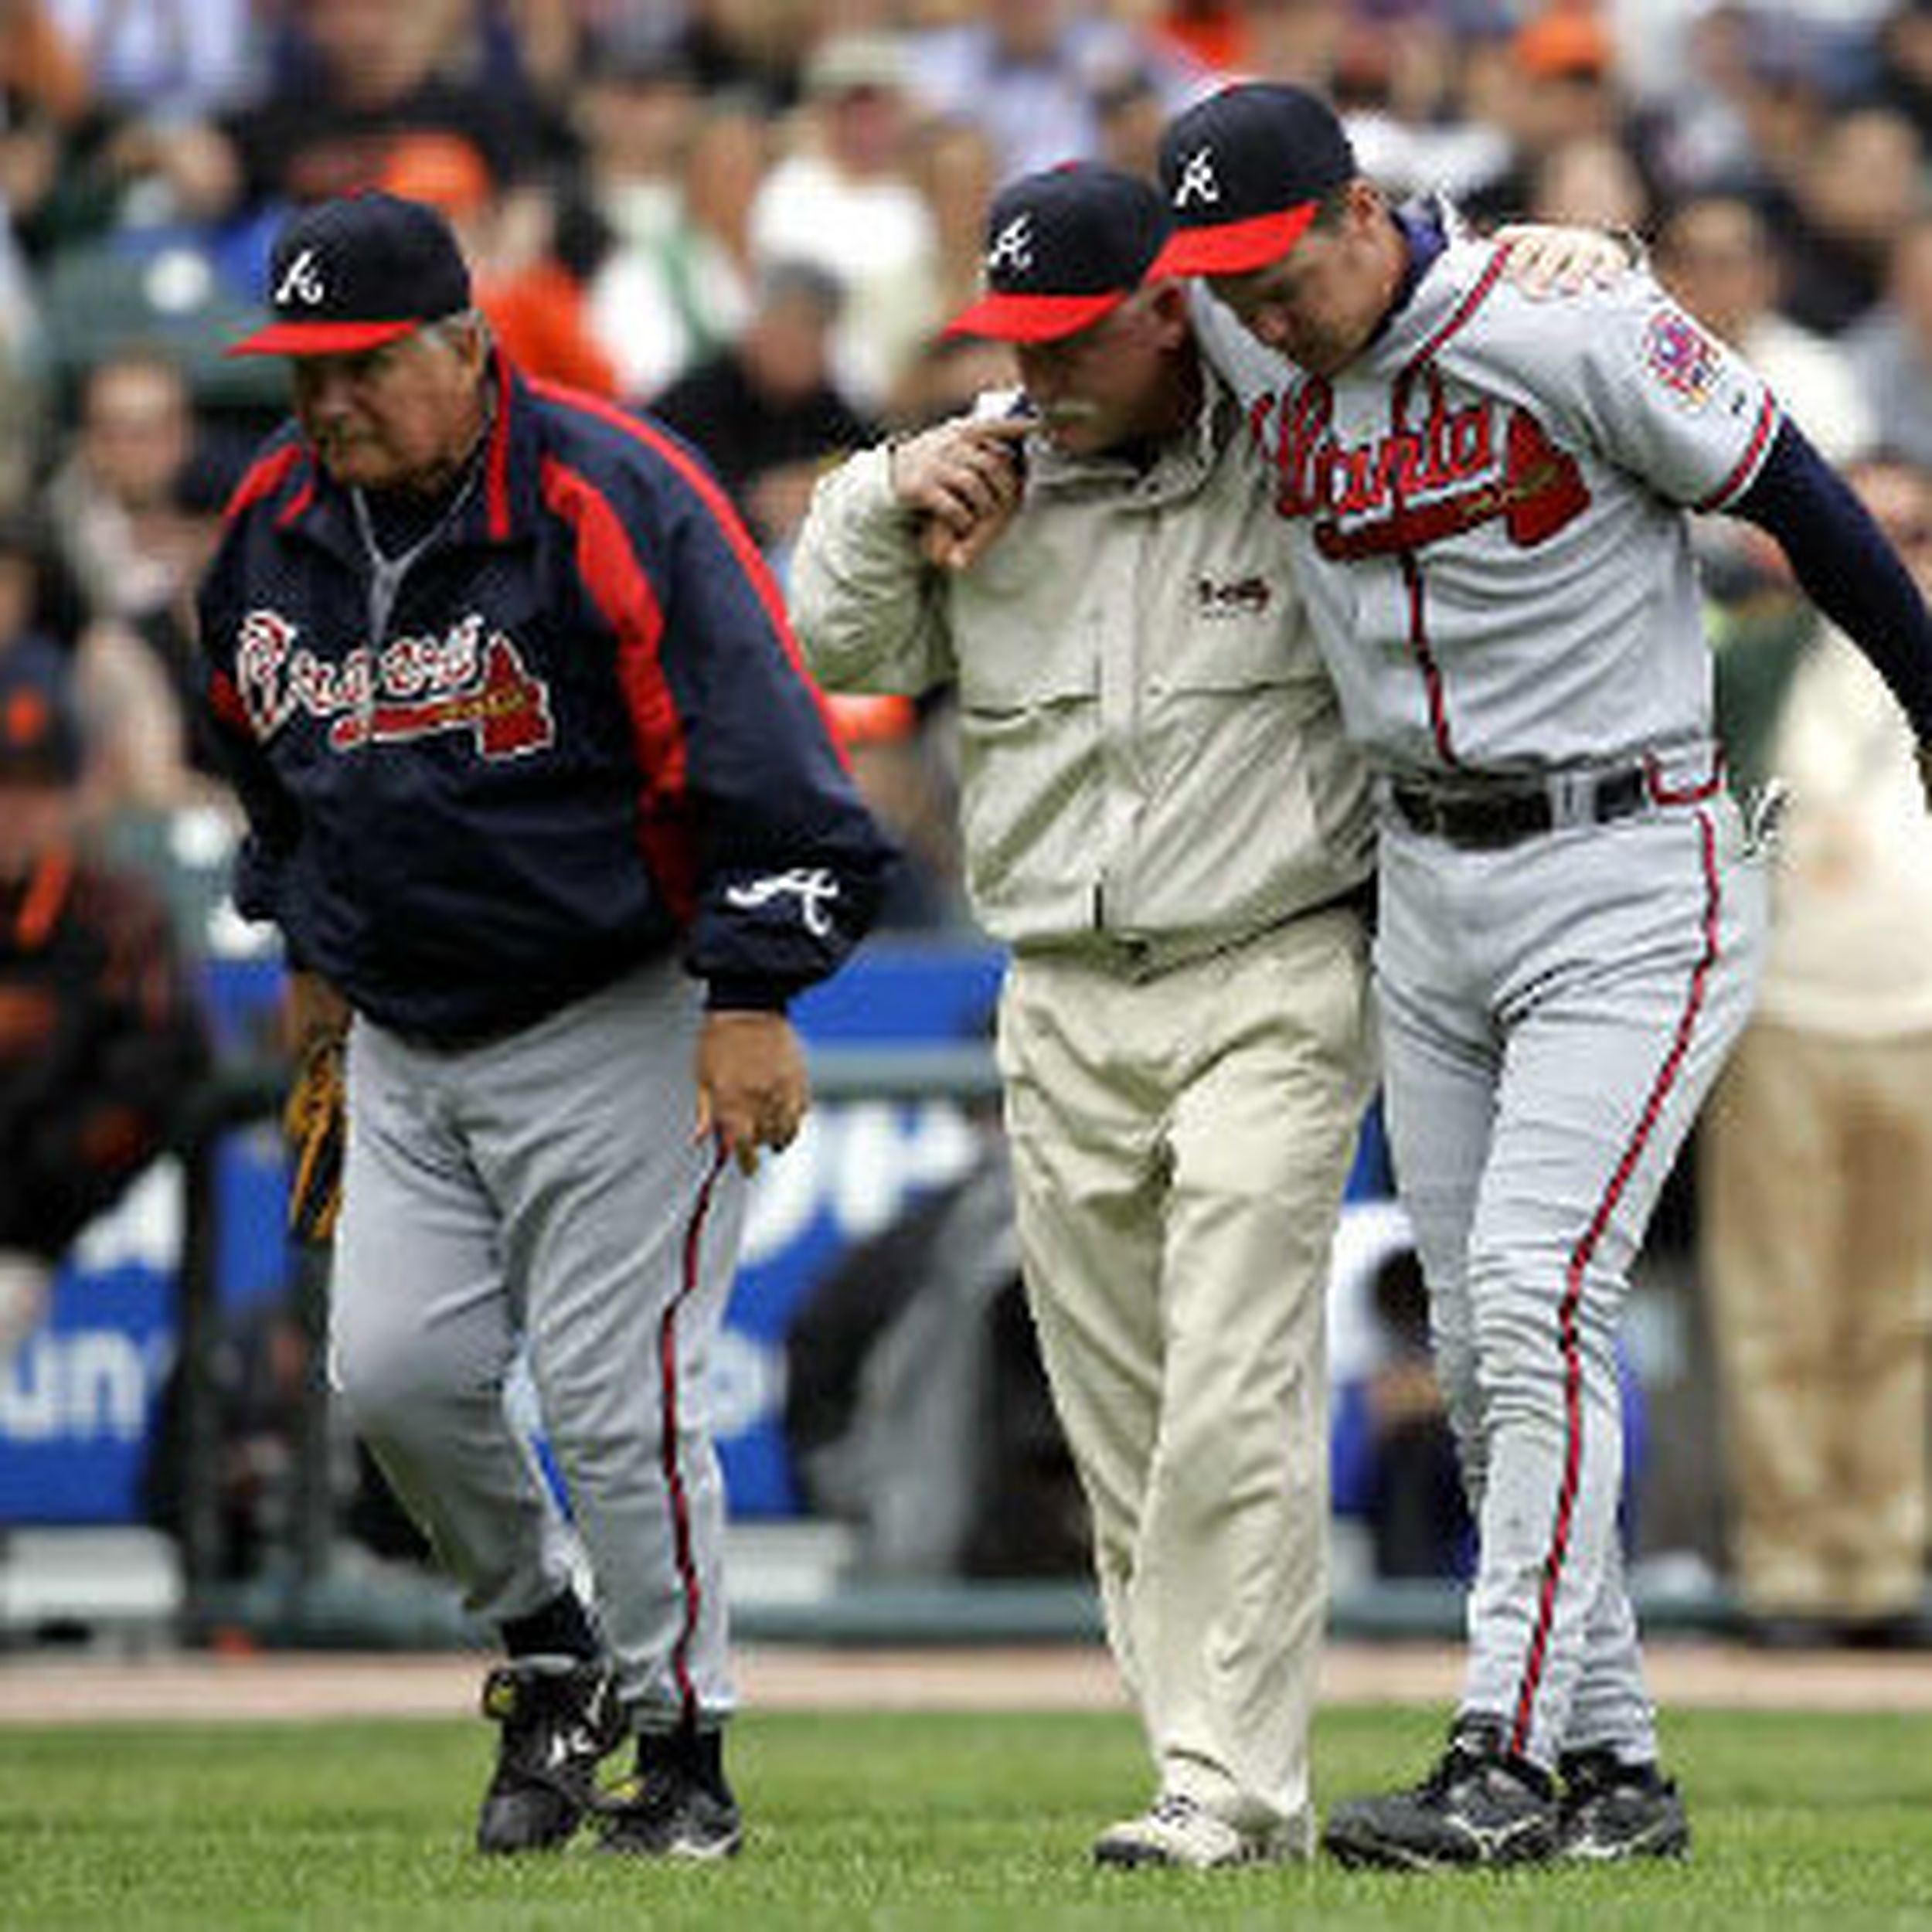 Braves place Chipper Jones on DL with bruised leg